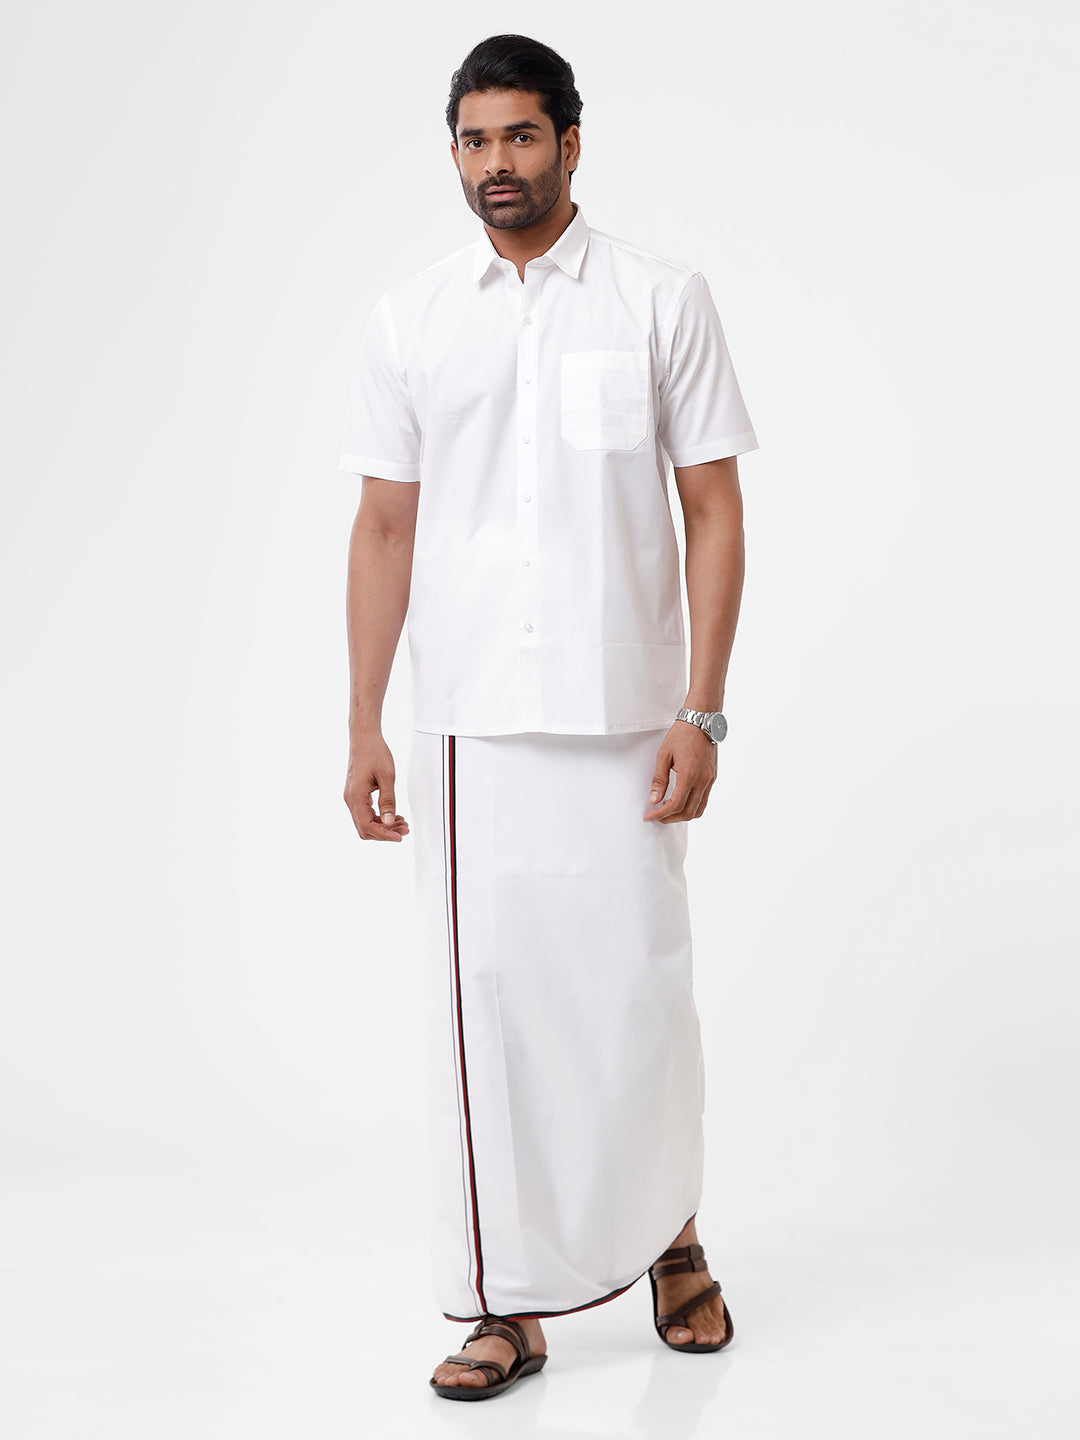 100% Cotton Political Dhoti VIP - DMK -Front view one